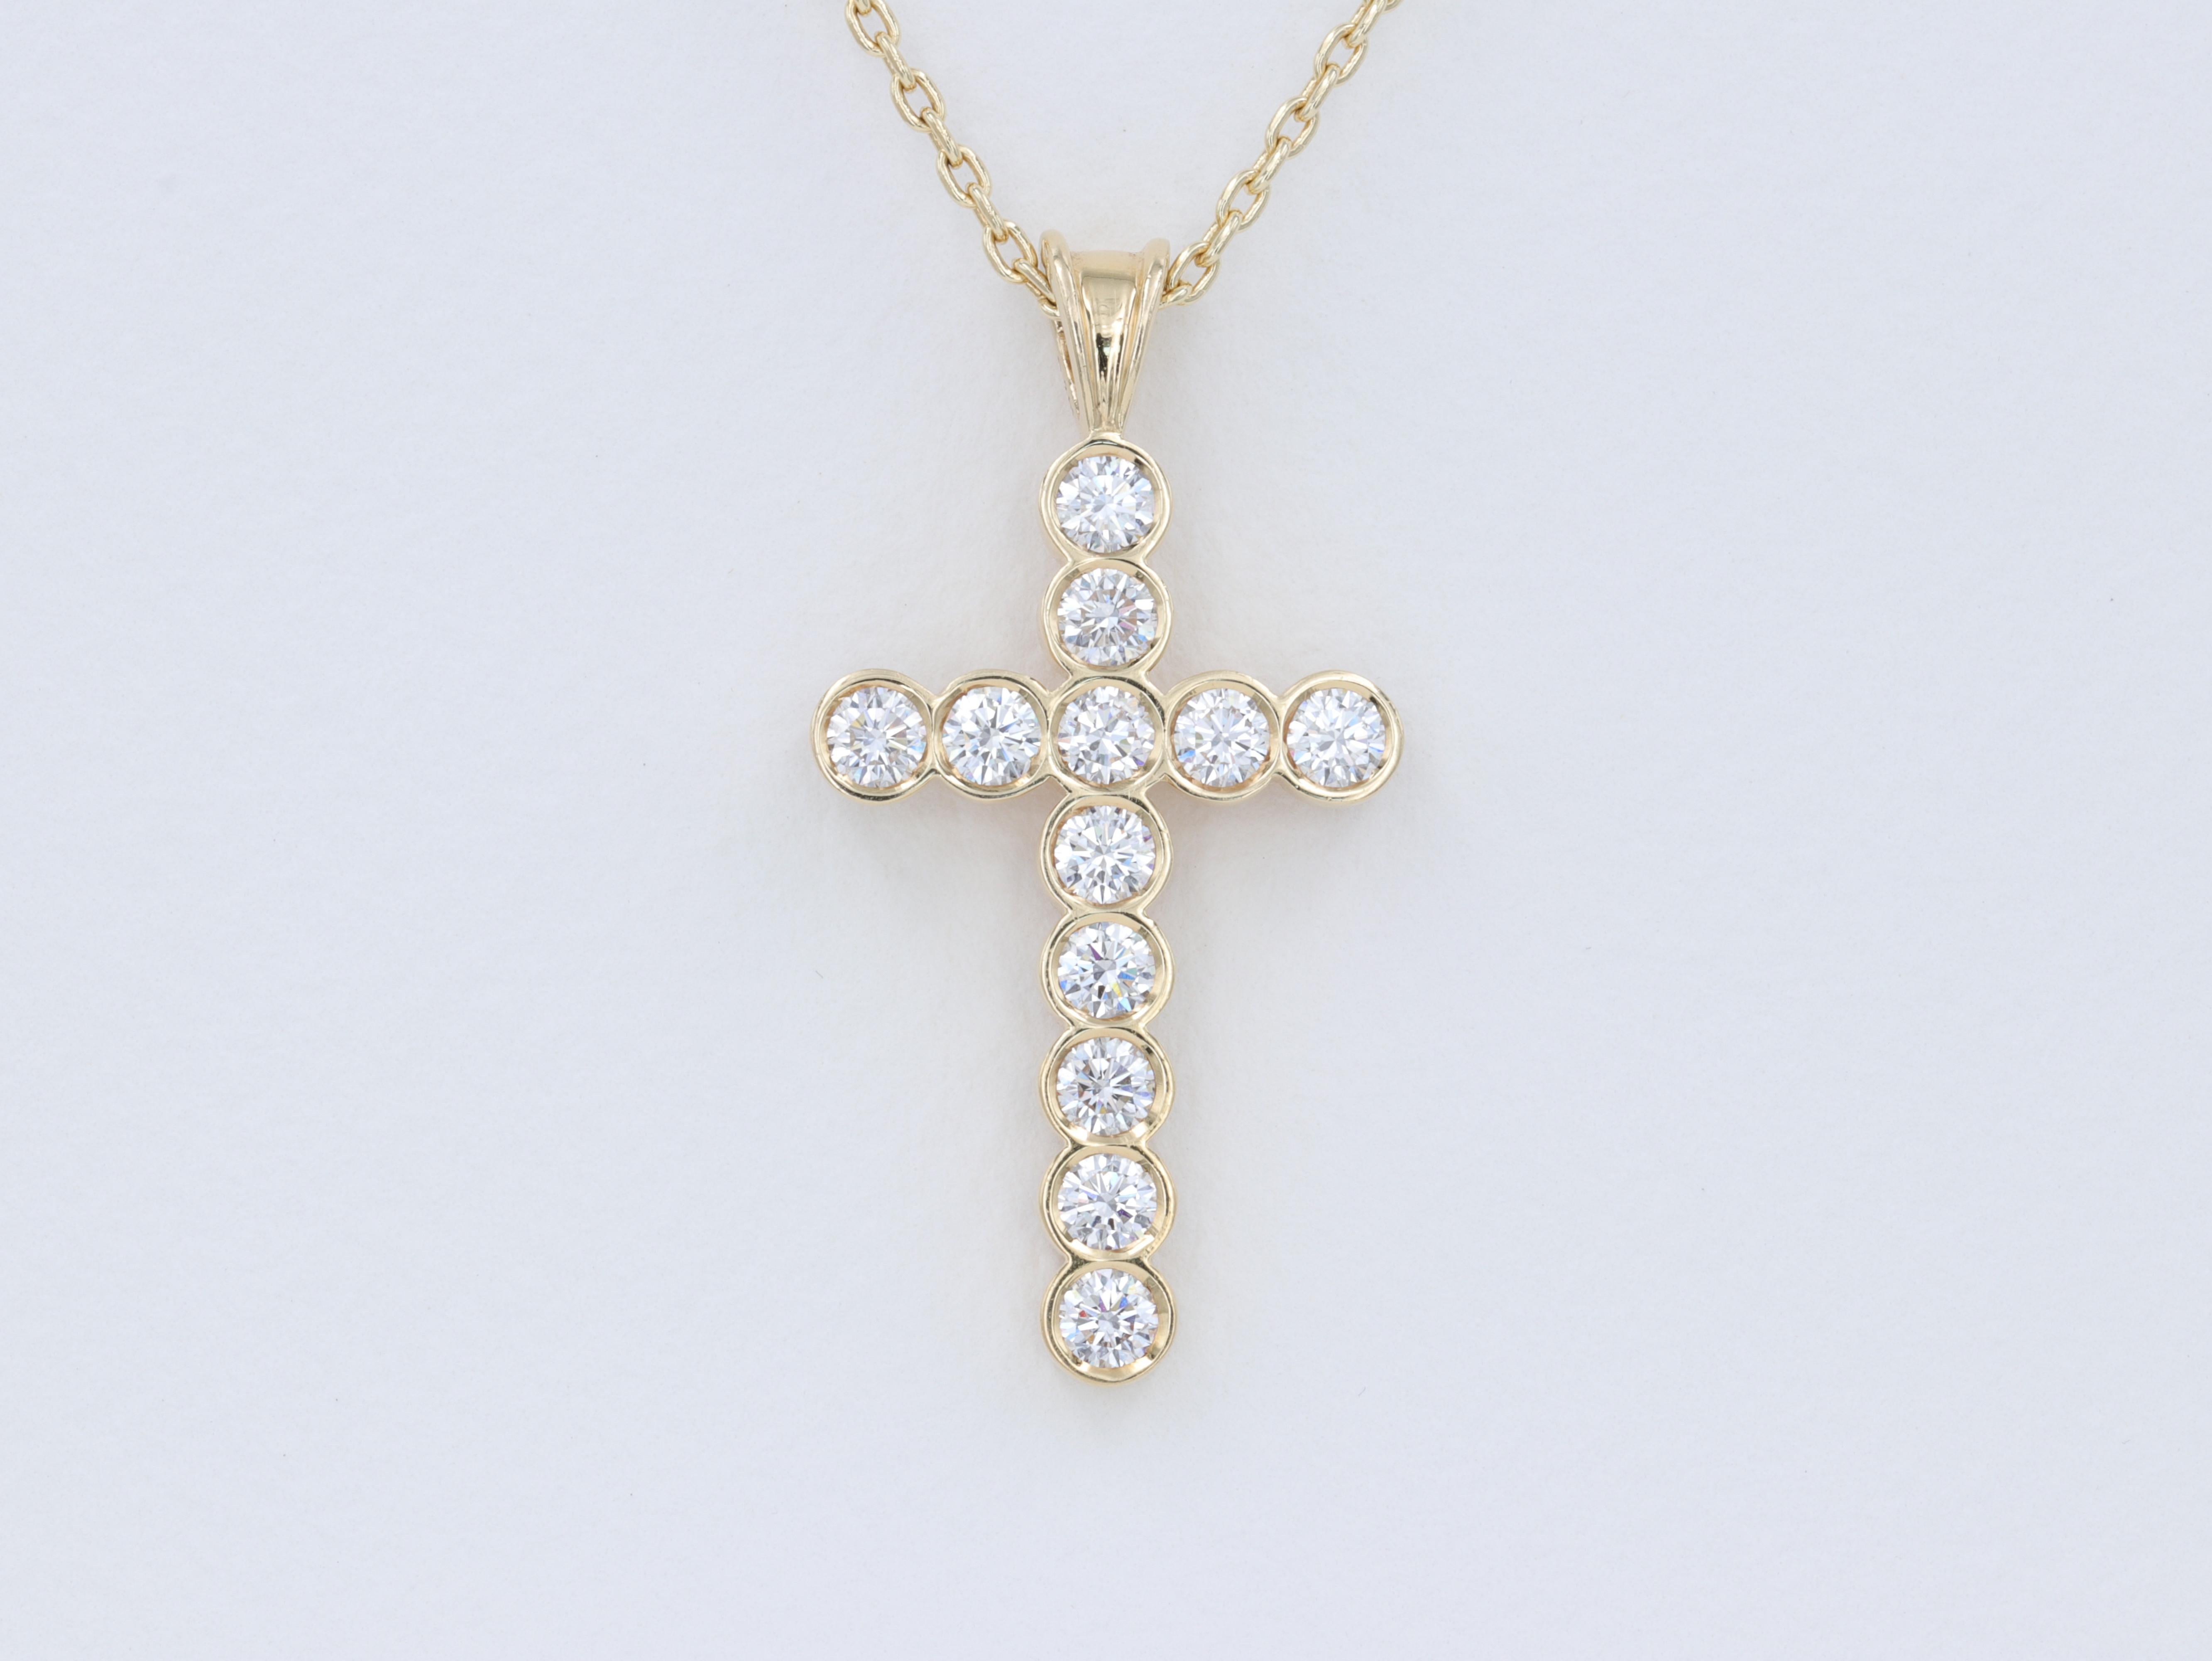 The cross perfected by Theo Fennell, with extreme attention to detail in all elements of this hand crafted cross, with ideal cut round brilliant cut diamonds sharply set in a bezel set design of perfect proportions.

The diamonds weigh 2.01 carats